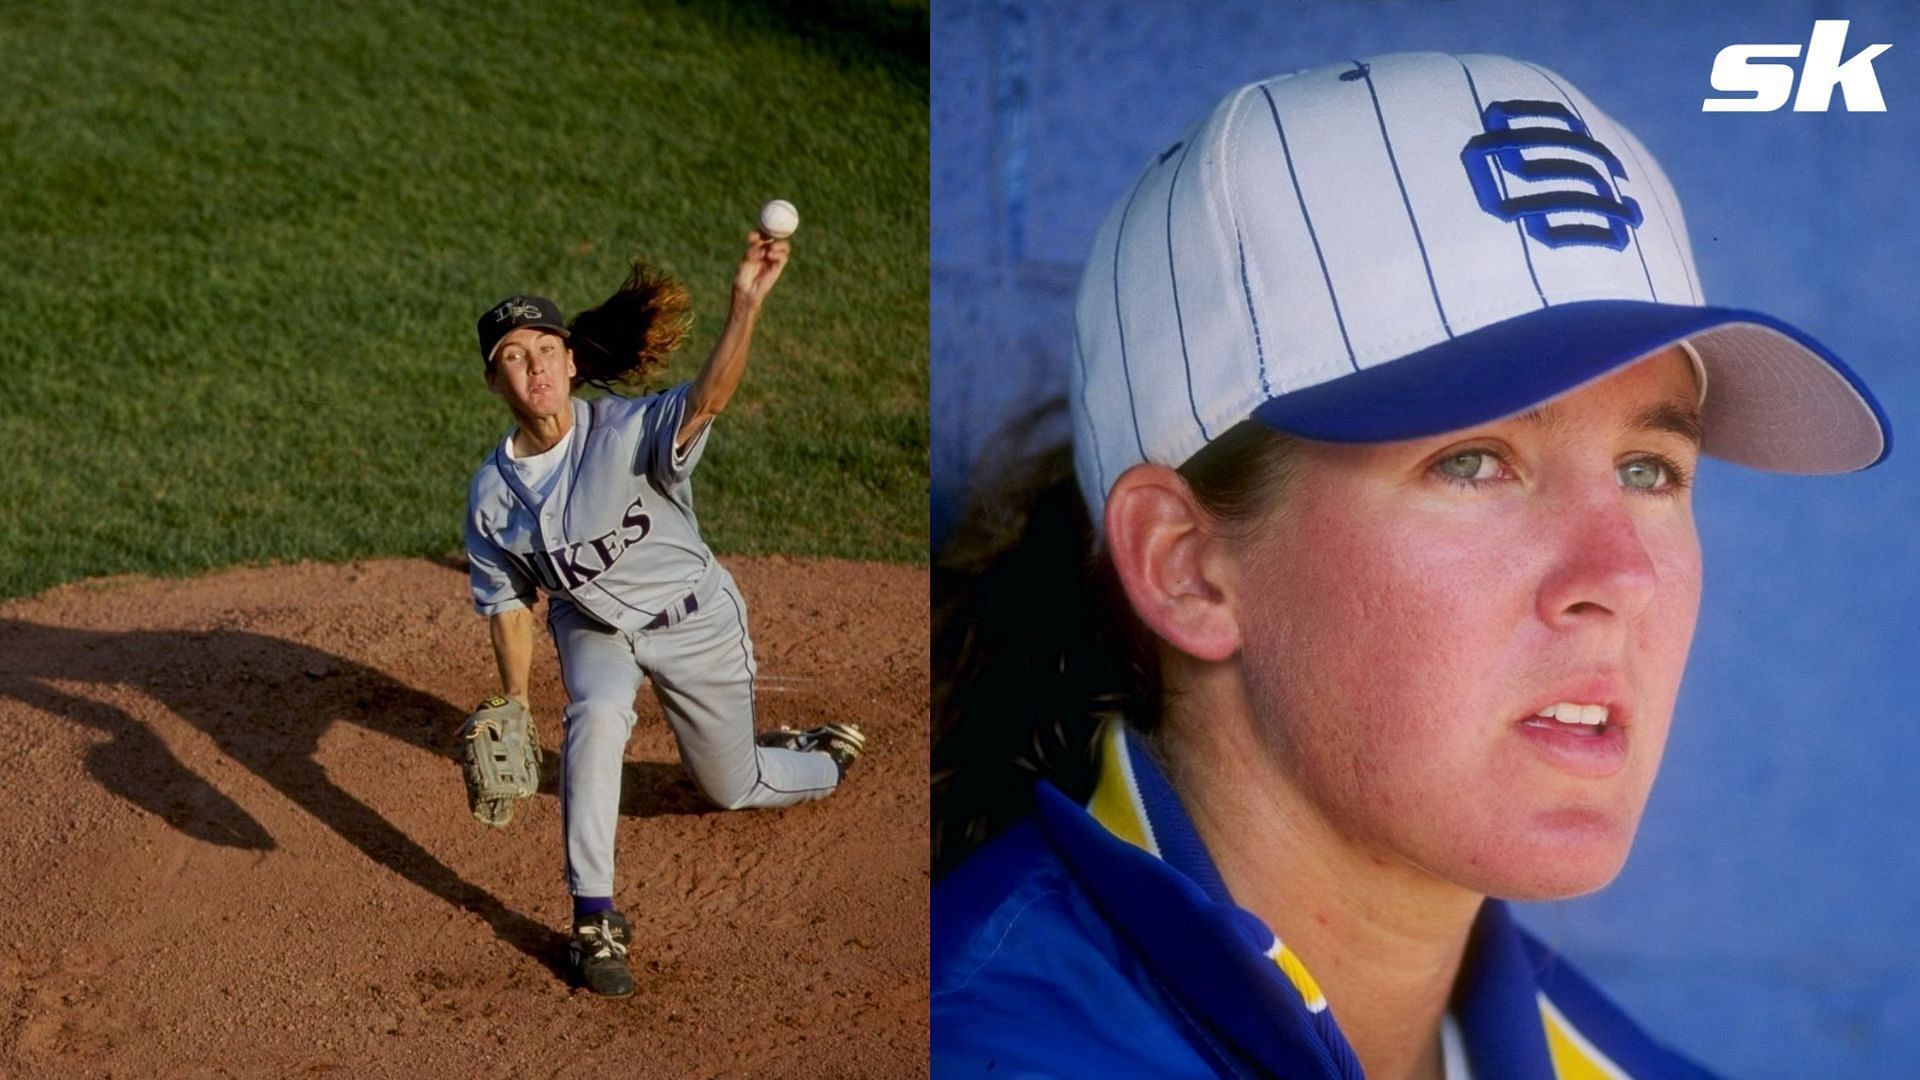 Ila Borders became the first female to pitch in a men